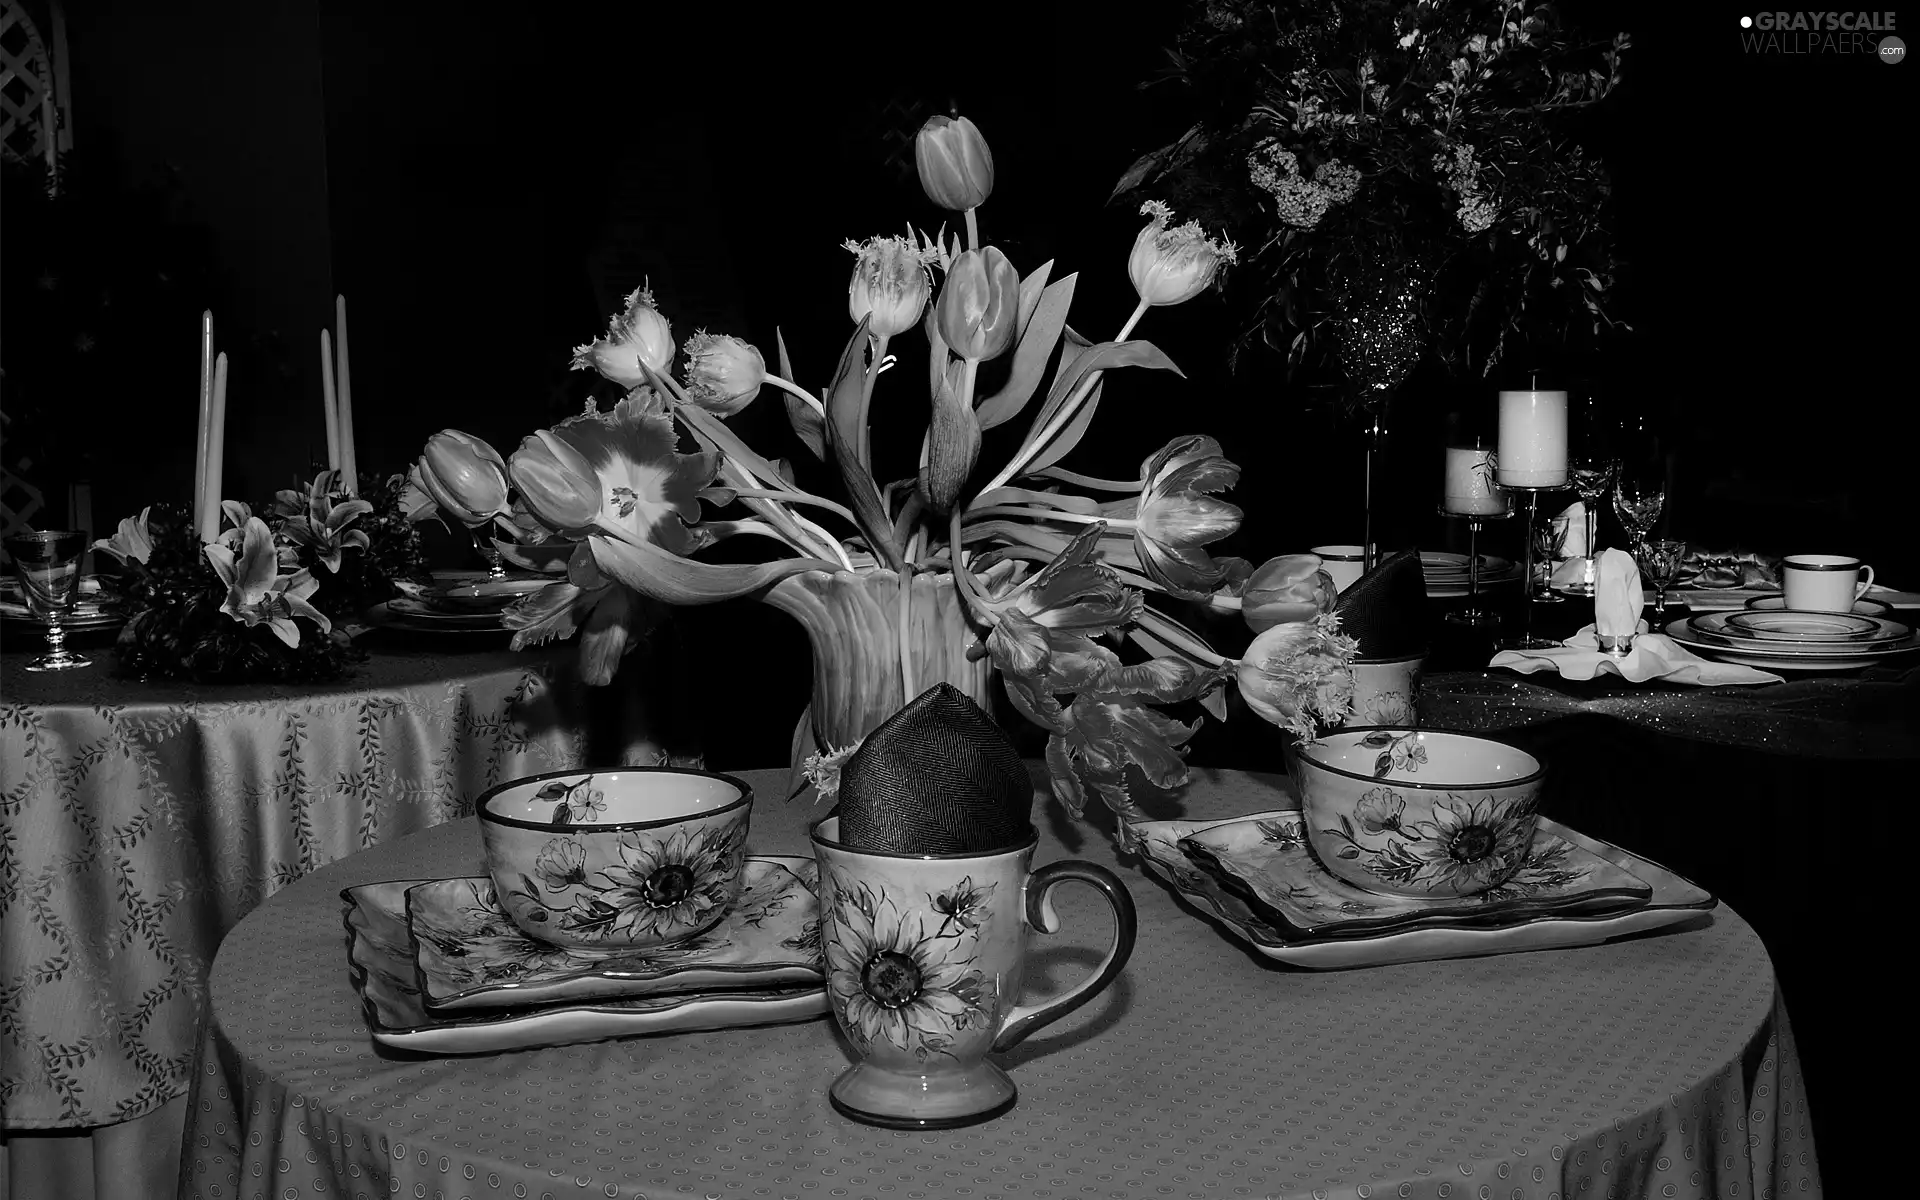 cups, Plates, Tulips, Vase, Table